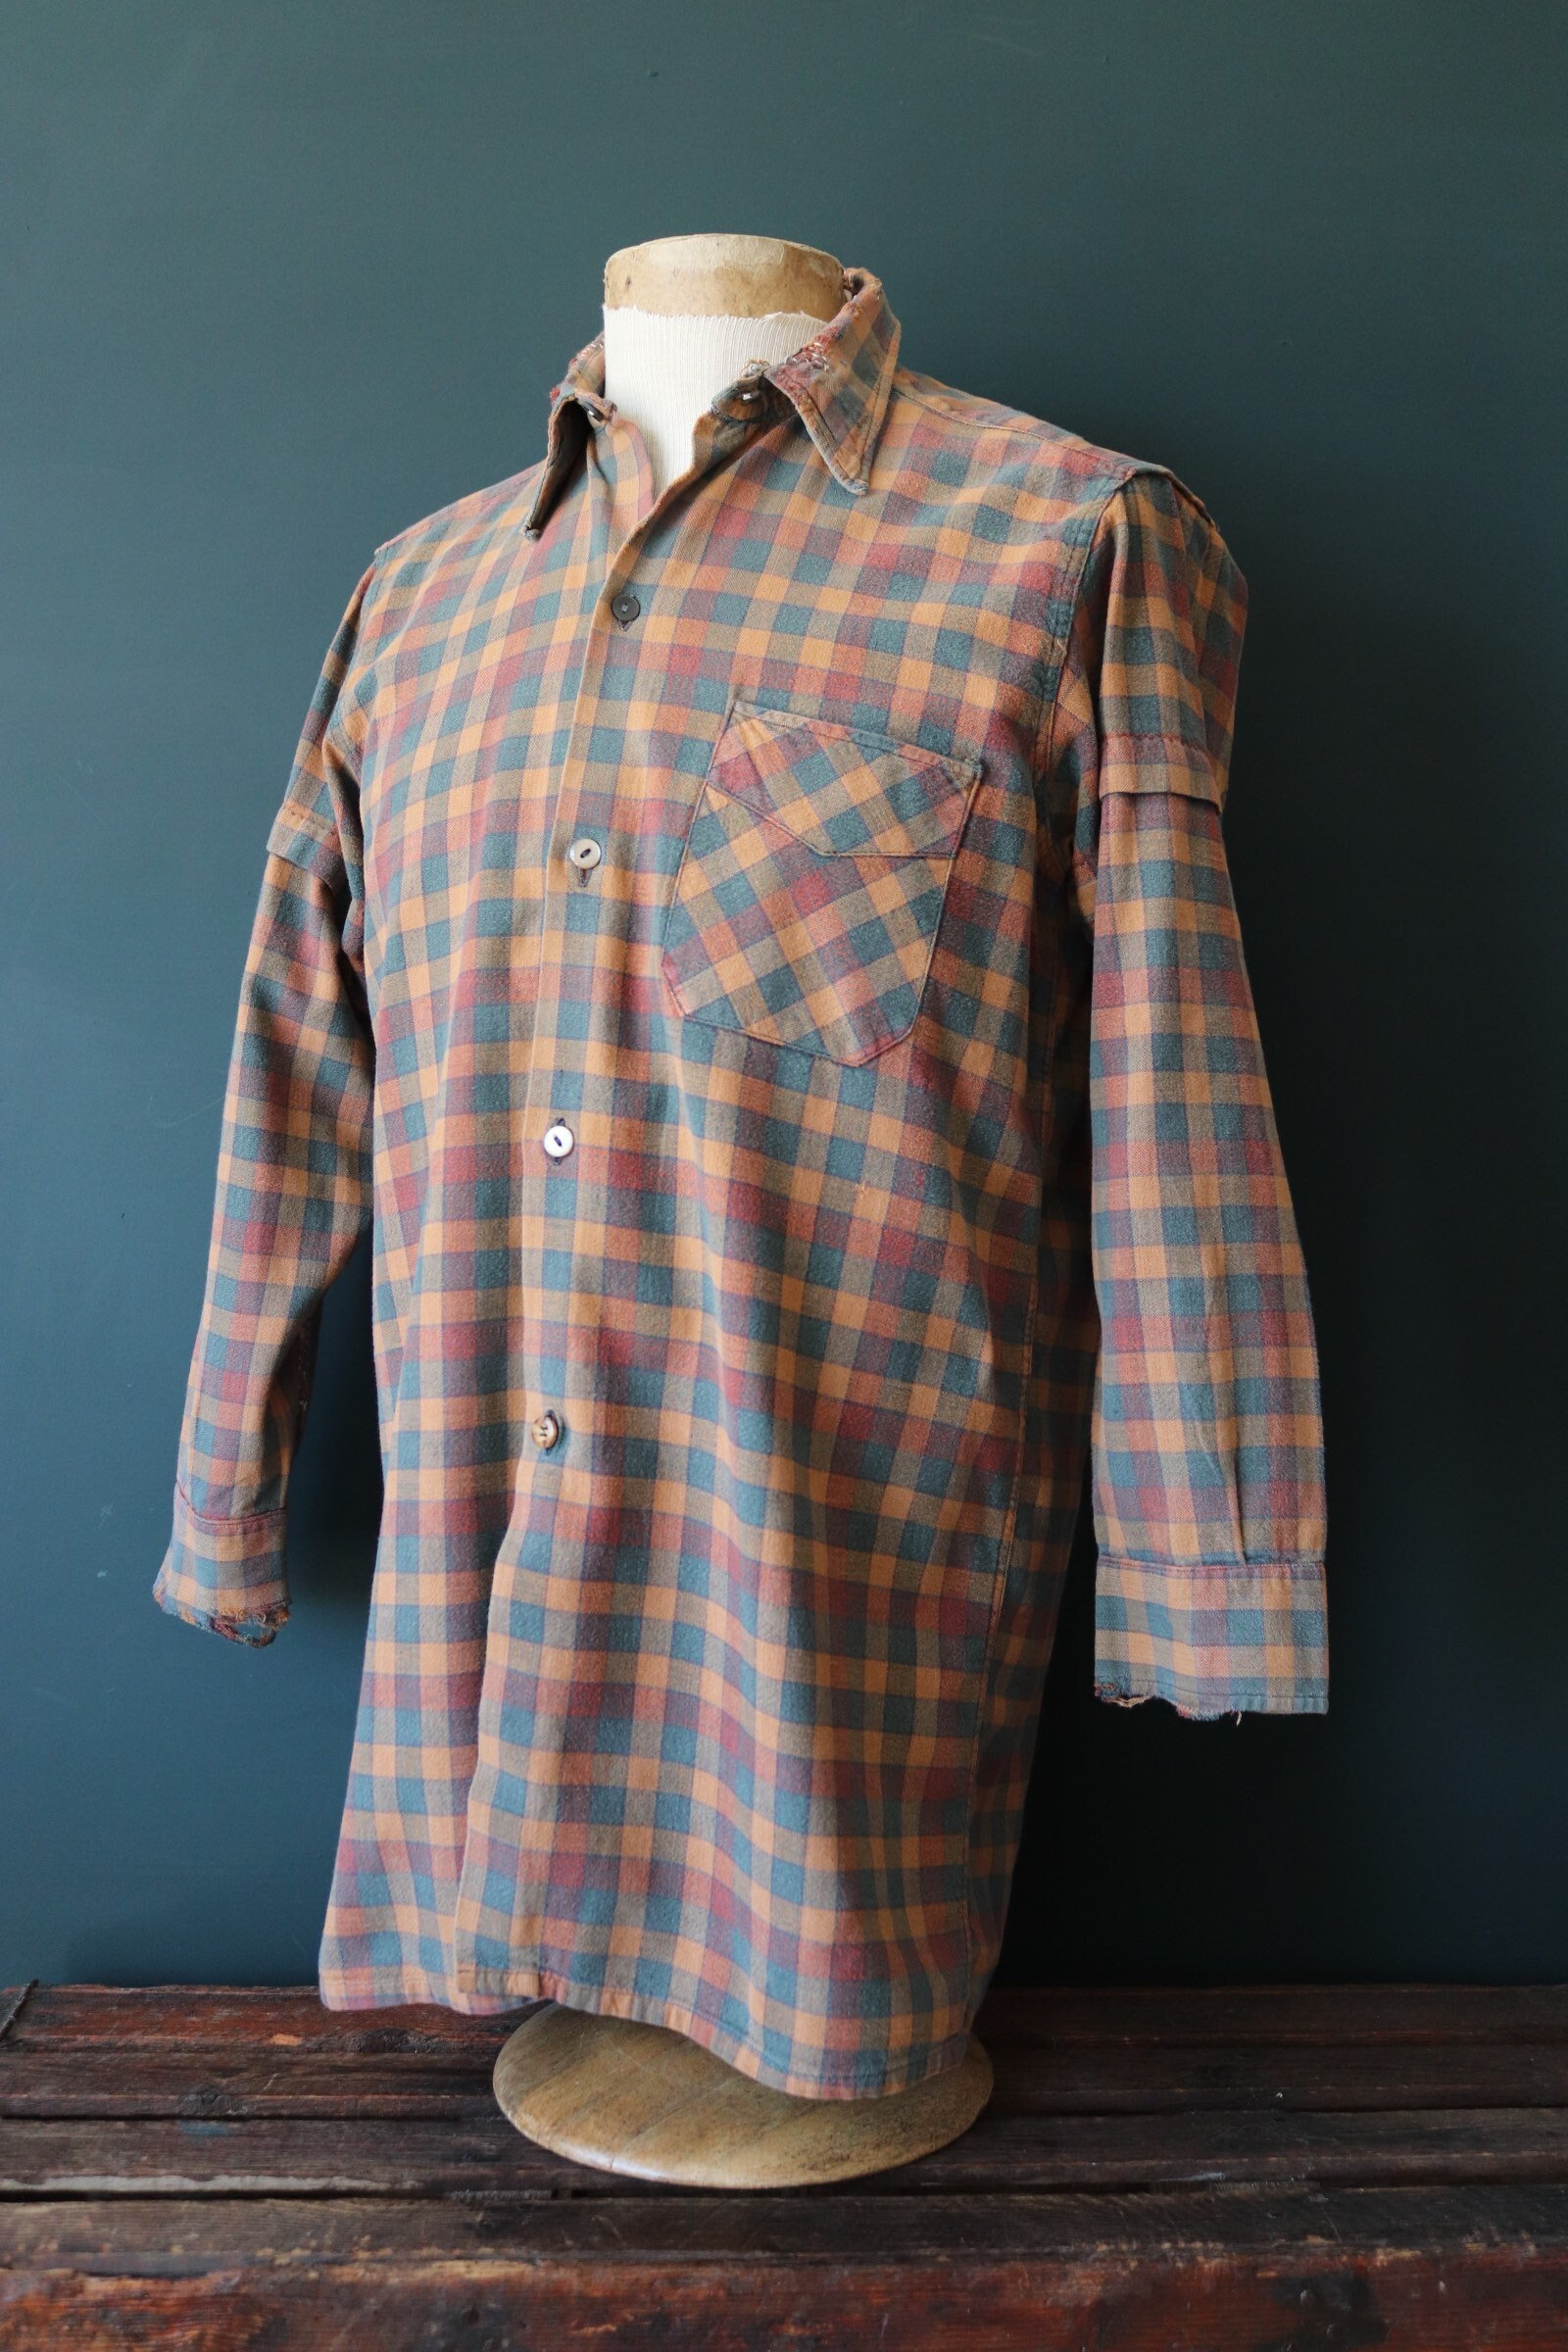 VINTAGE 50s FRENCH WORK SHIRT